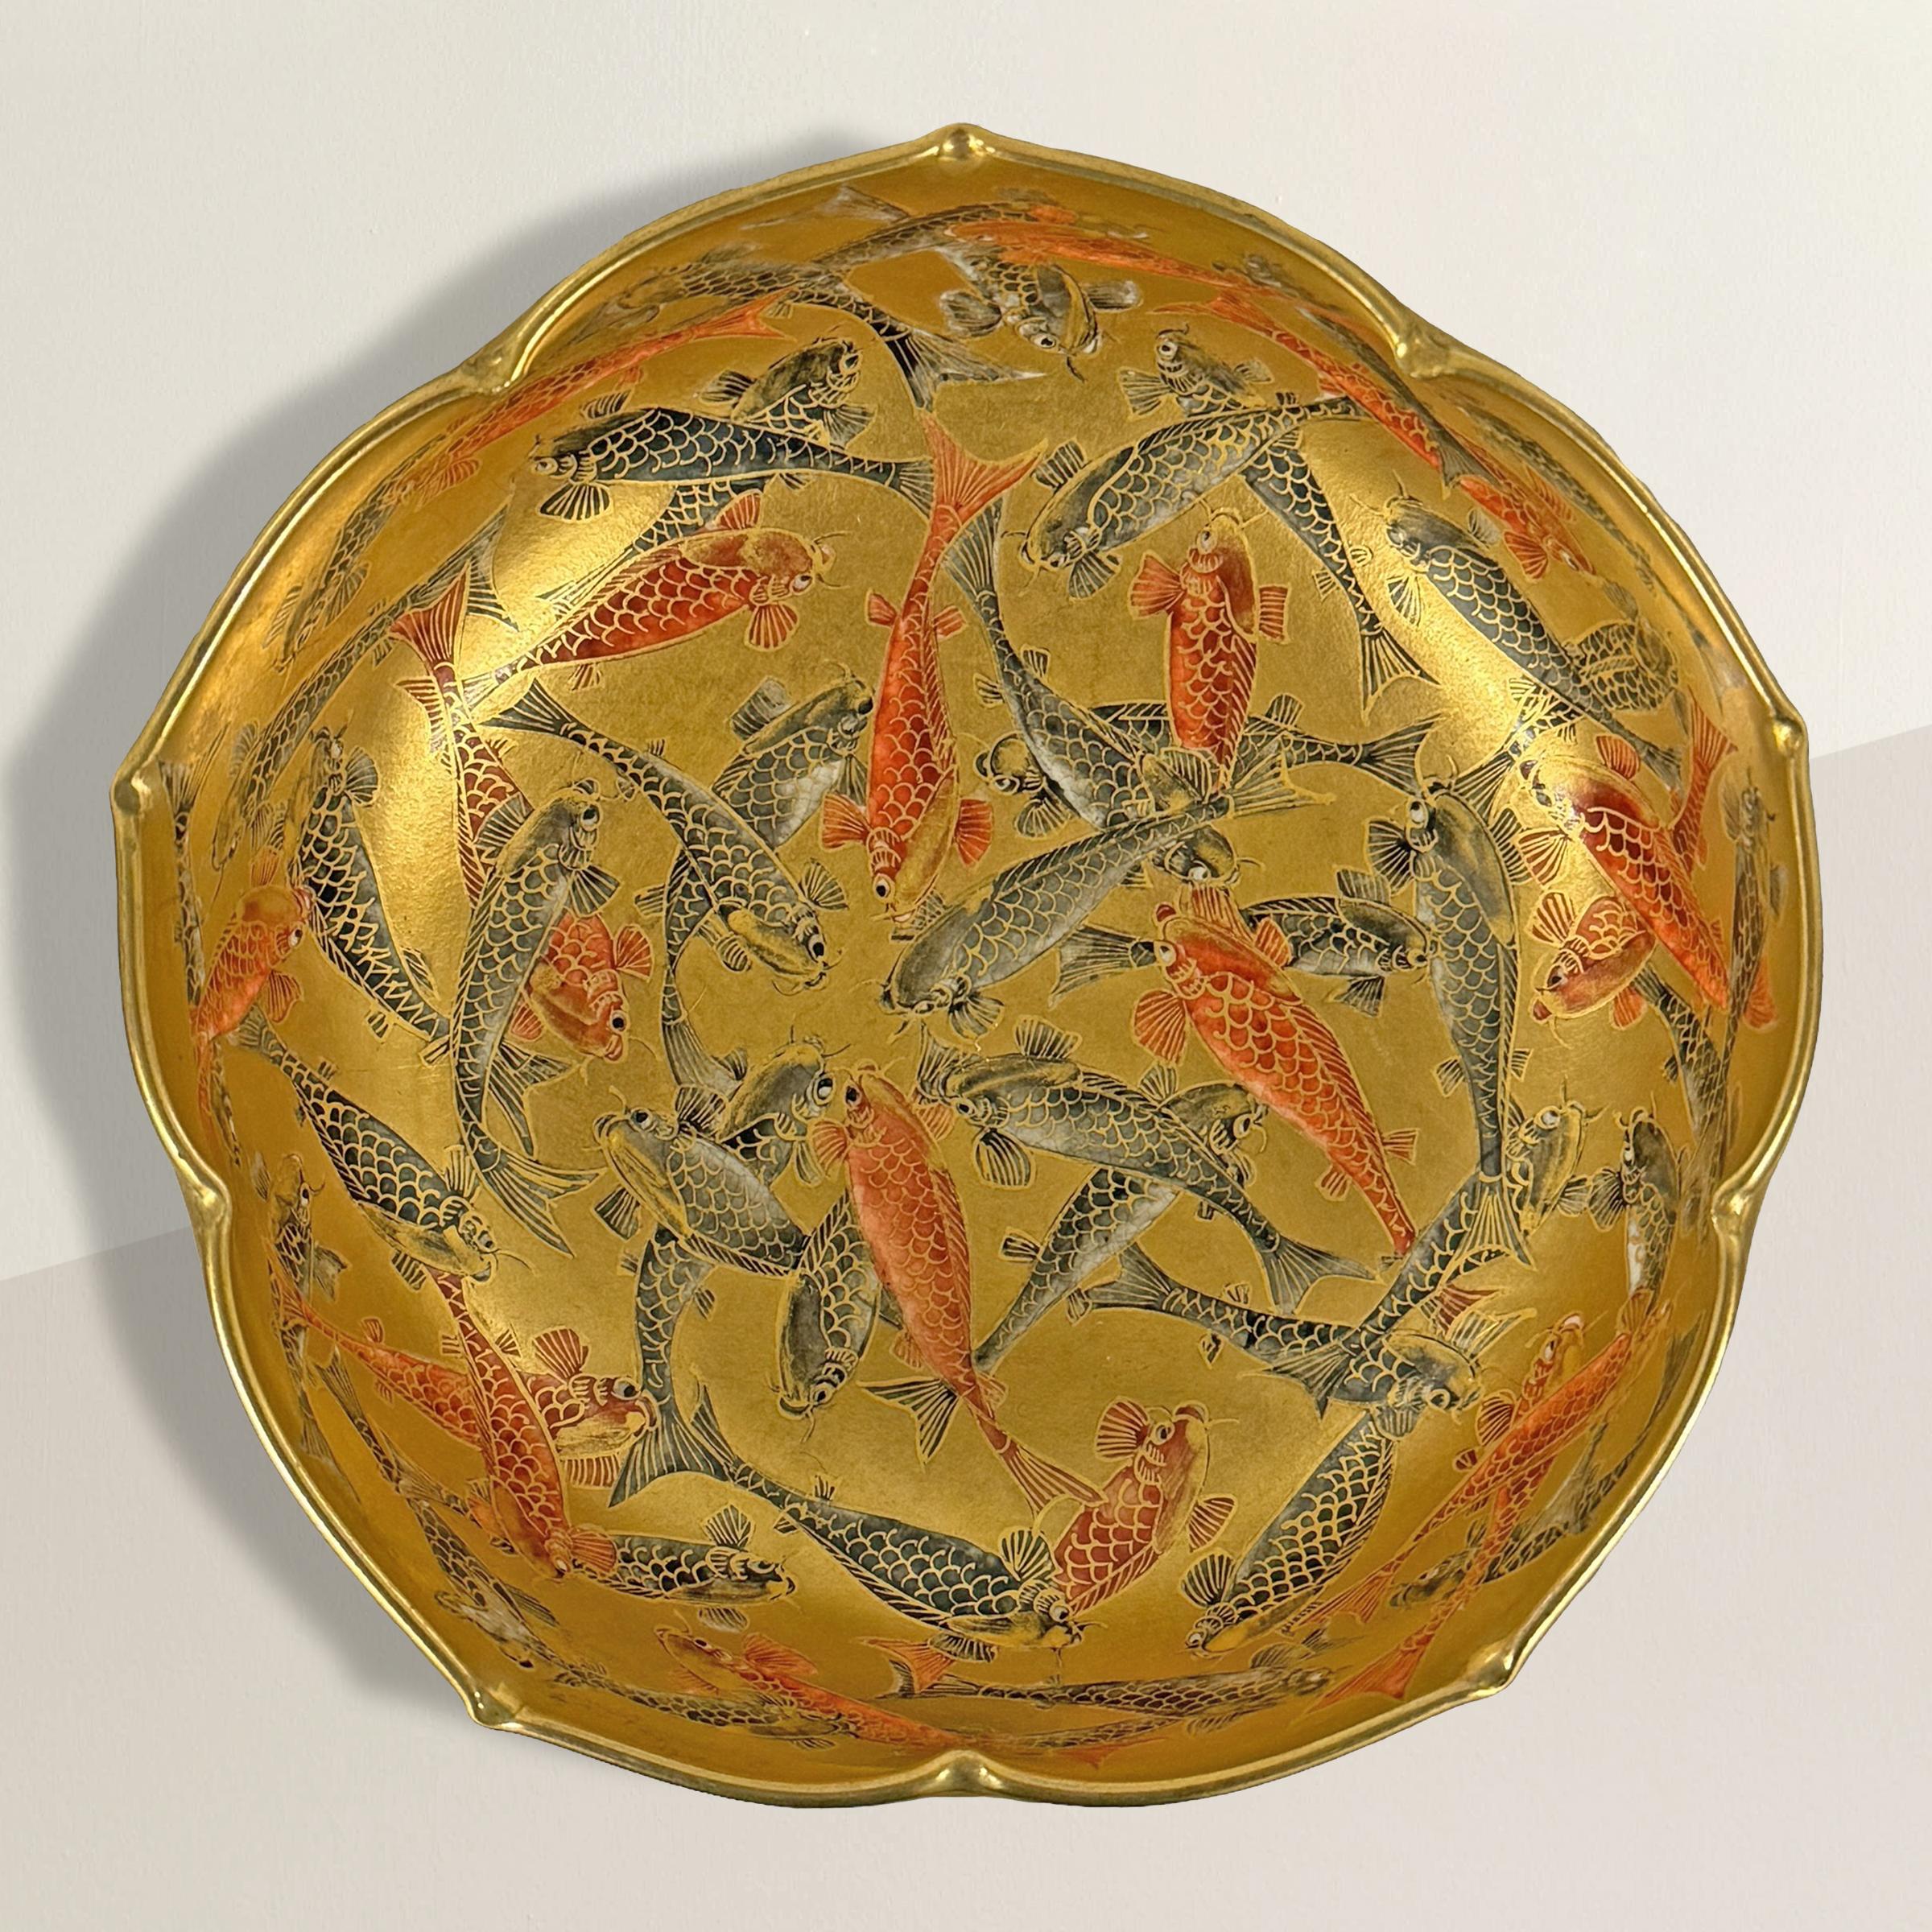 This extraordinary 19th-century Meiji period Japanese Satsuma lotus-form bowl is an epitome of artistic mastery and cultural significance. Adorned meticulously with red and black koi gracefully traversing a shimmering pond of gilt porcelain, it